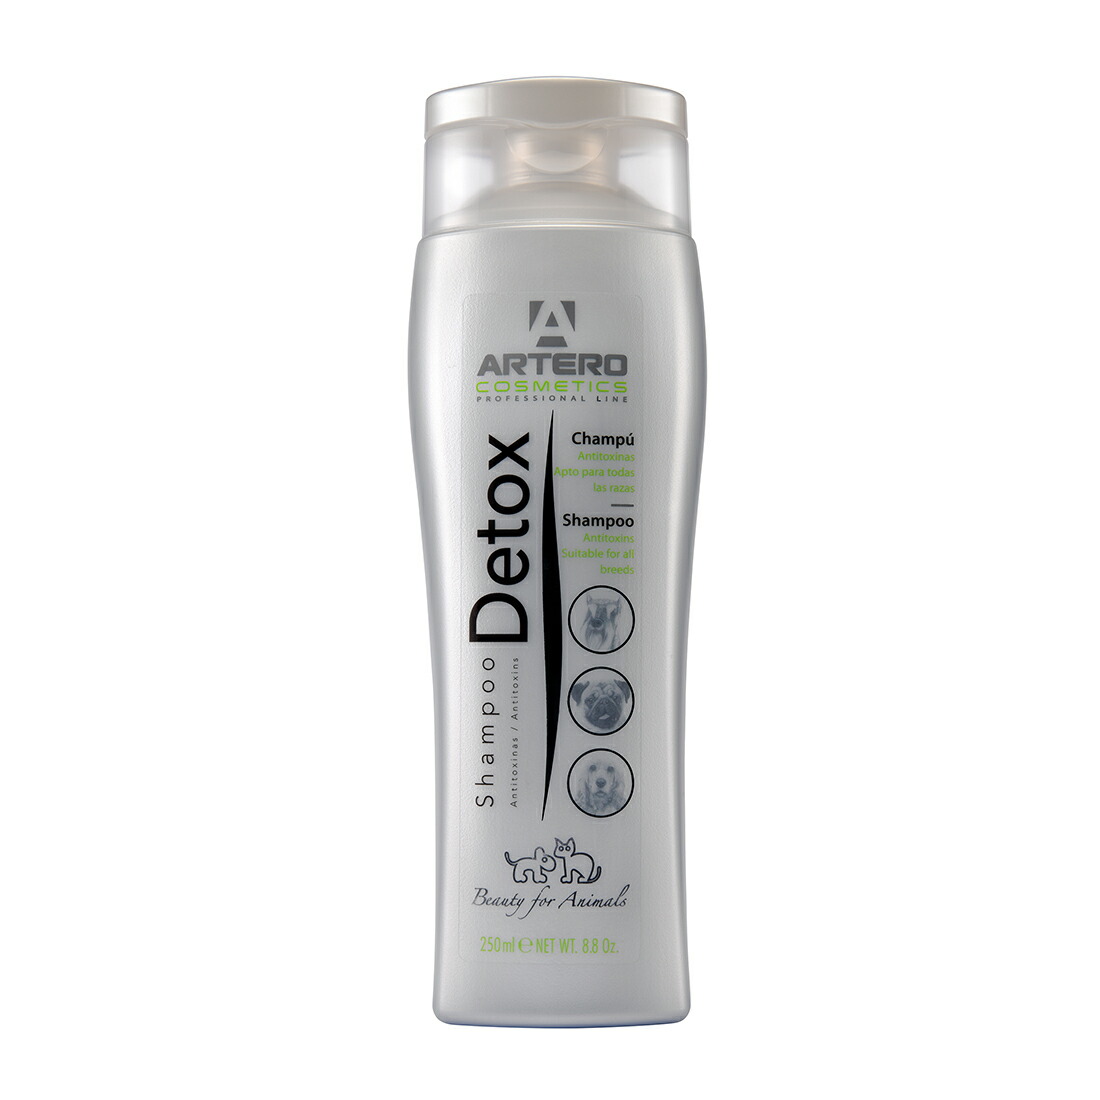 Artero Speed Dry Shampoo 5 9 Oz Read More Reviews Of The Product By Visiting The Link On The Image This Is An Affiliat Dry Shampoo Shampoo Dog Grooming